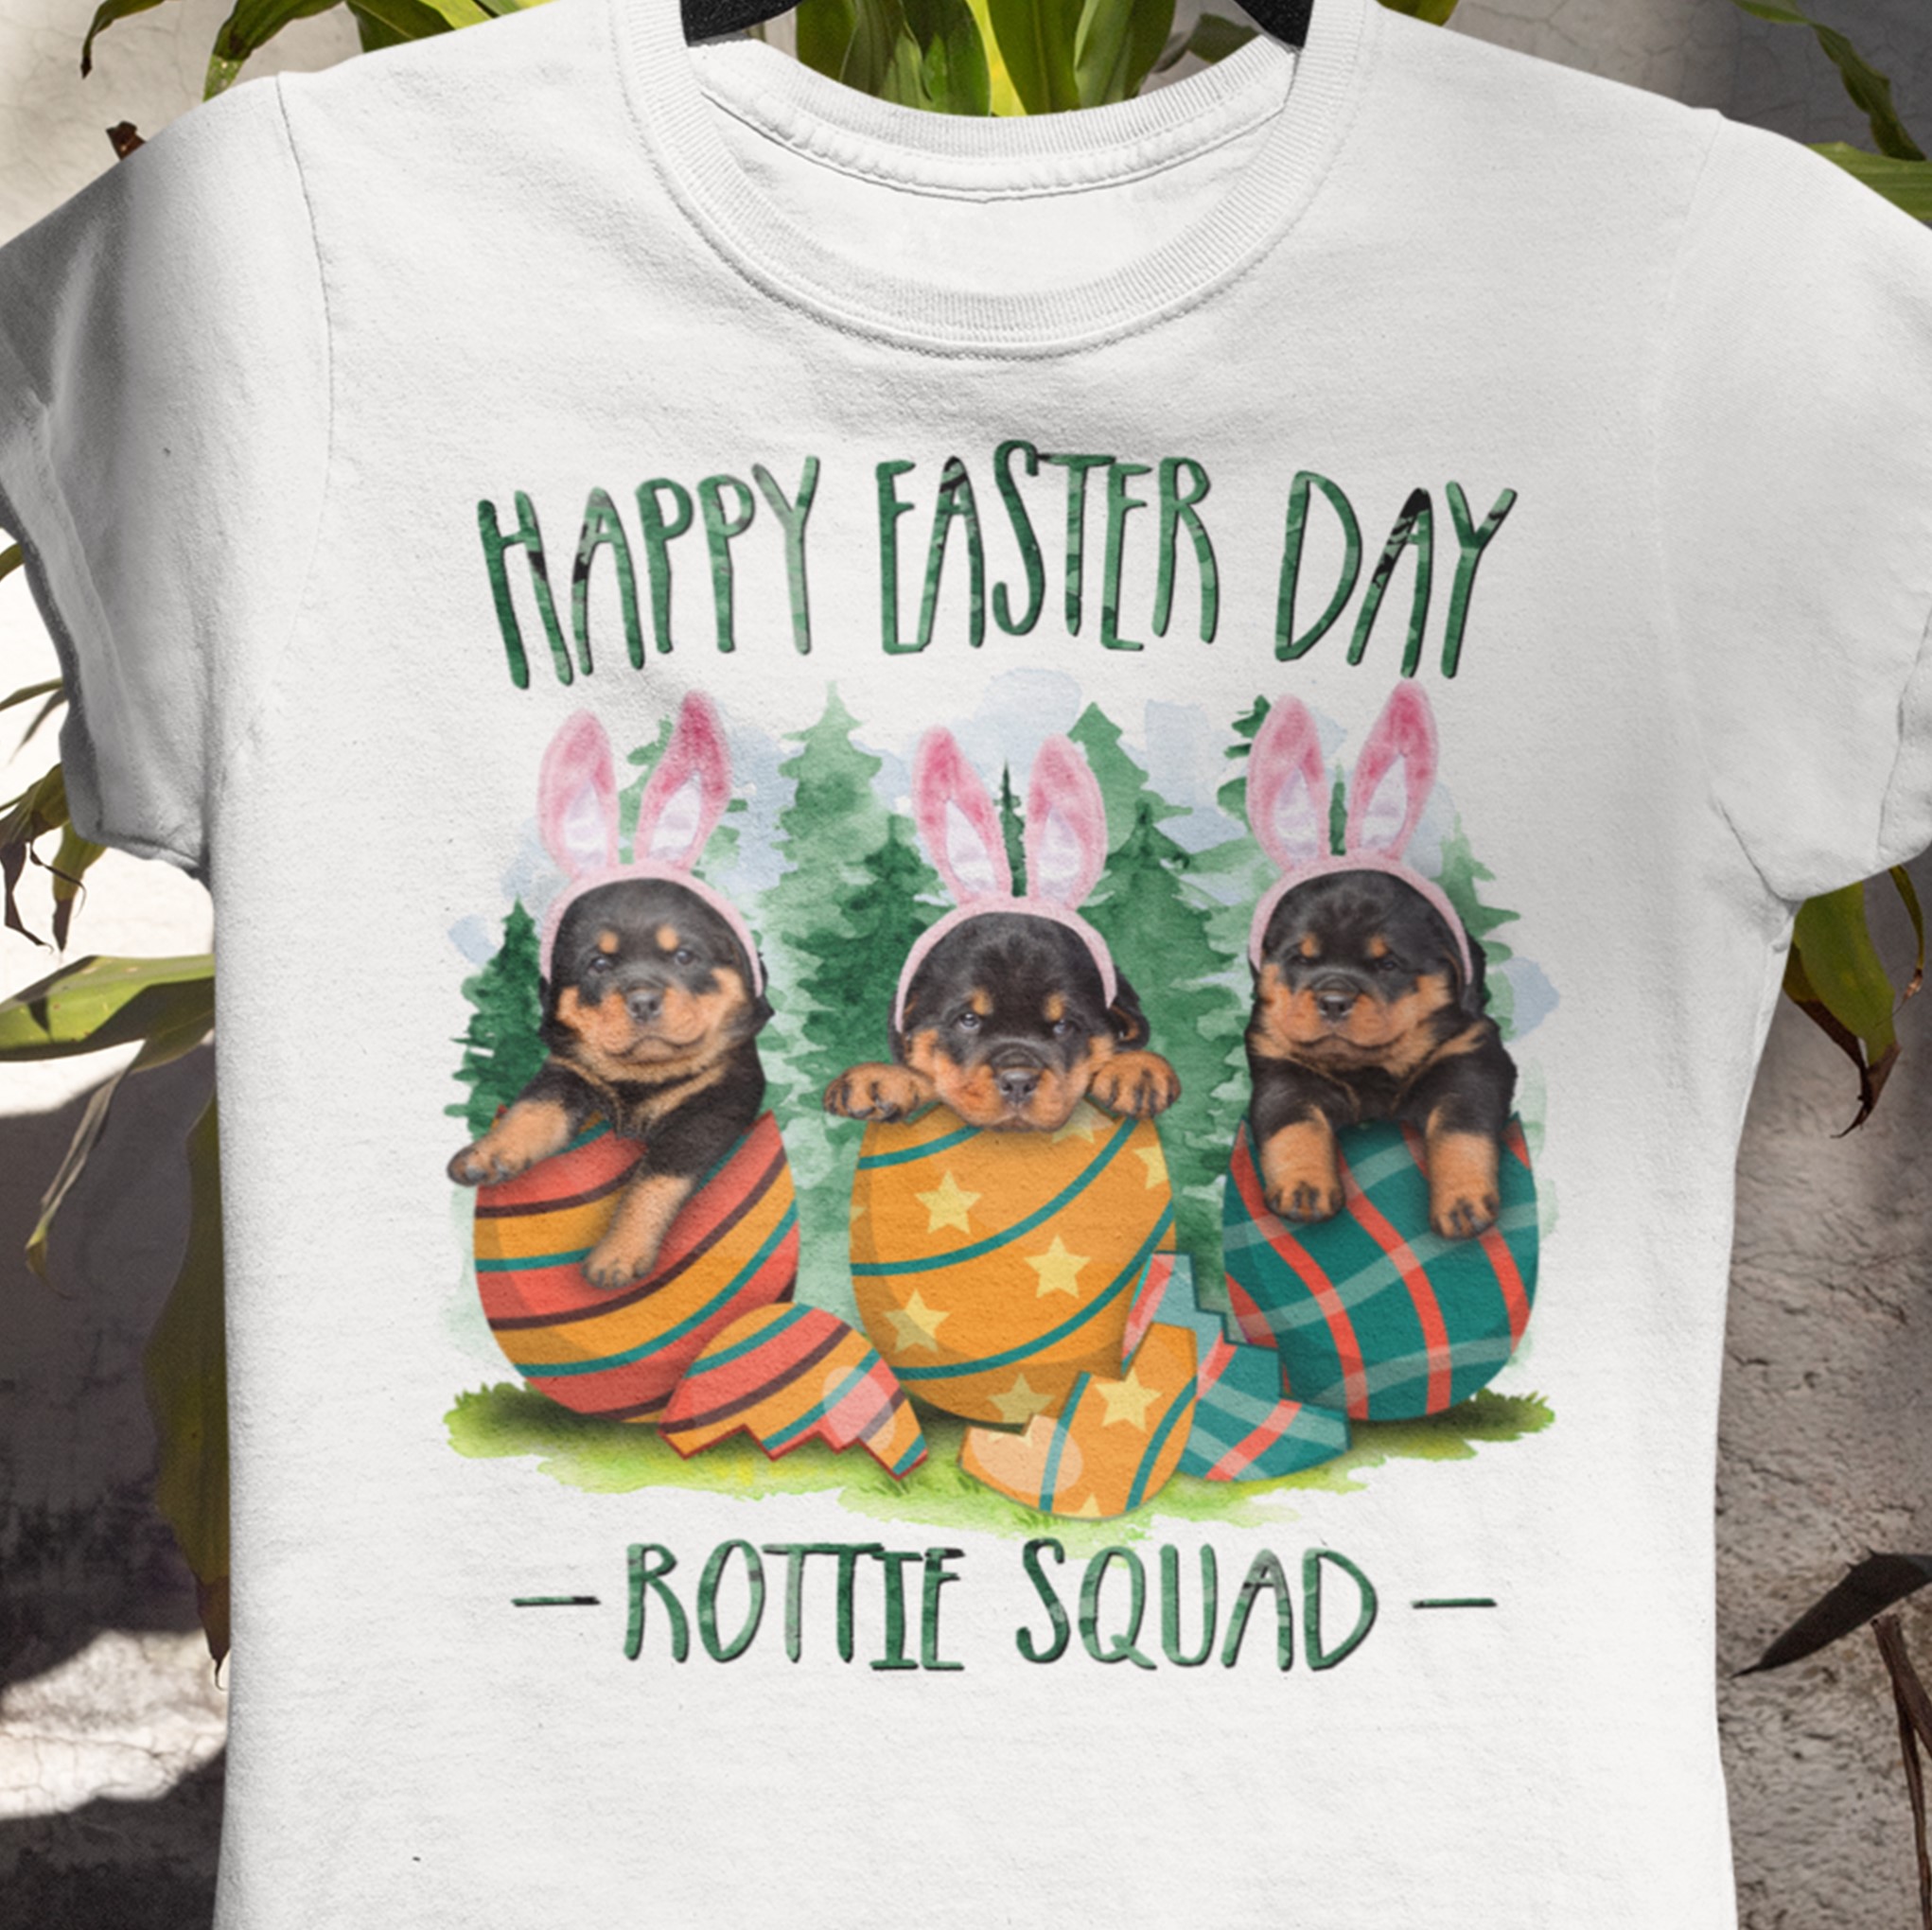 Happy easter day - Rottie squad